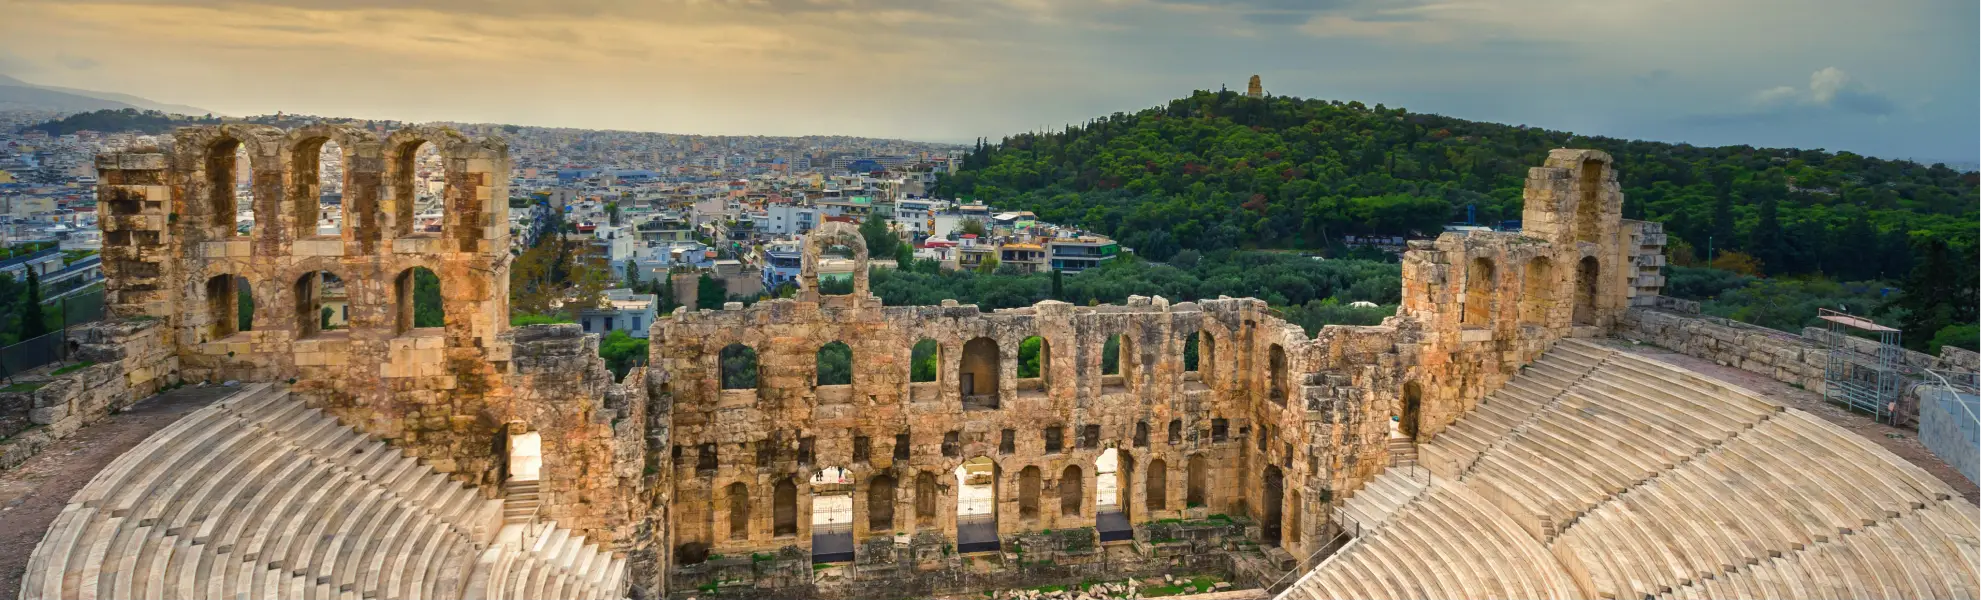 The ruins of a classic greek ampitheater over looking a modern city